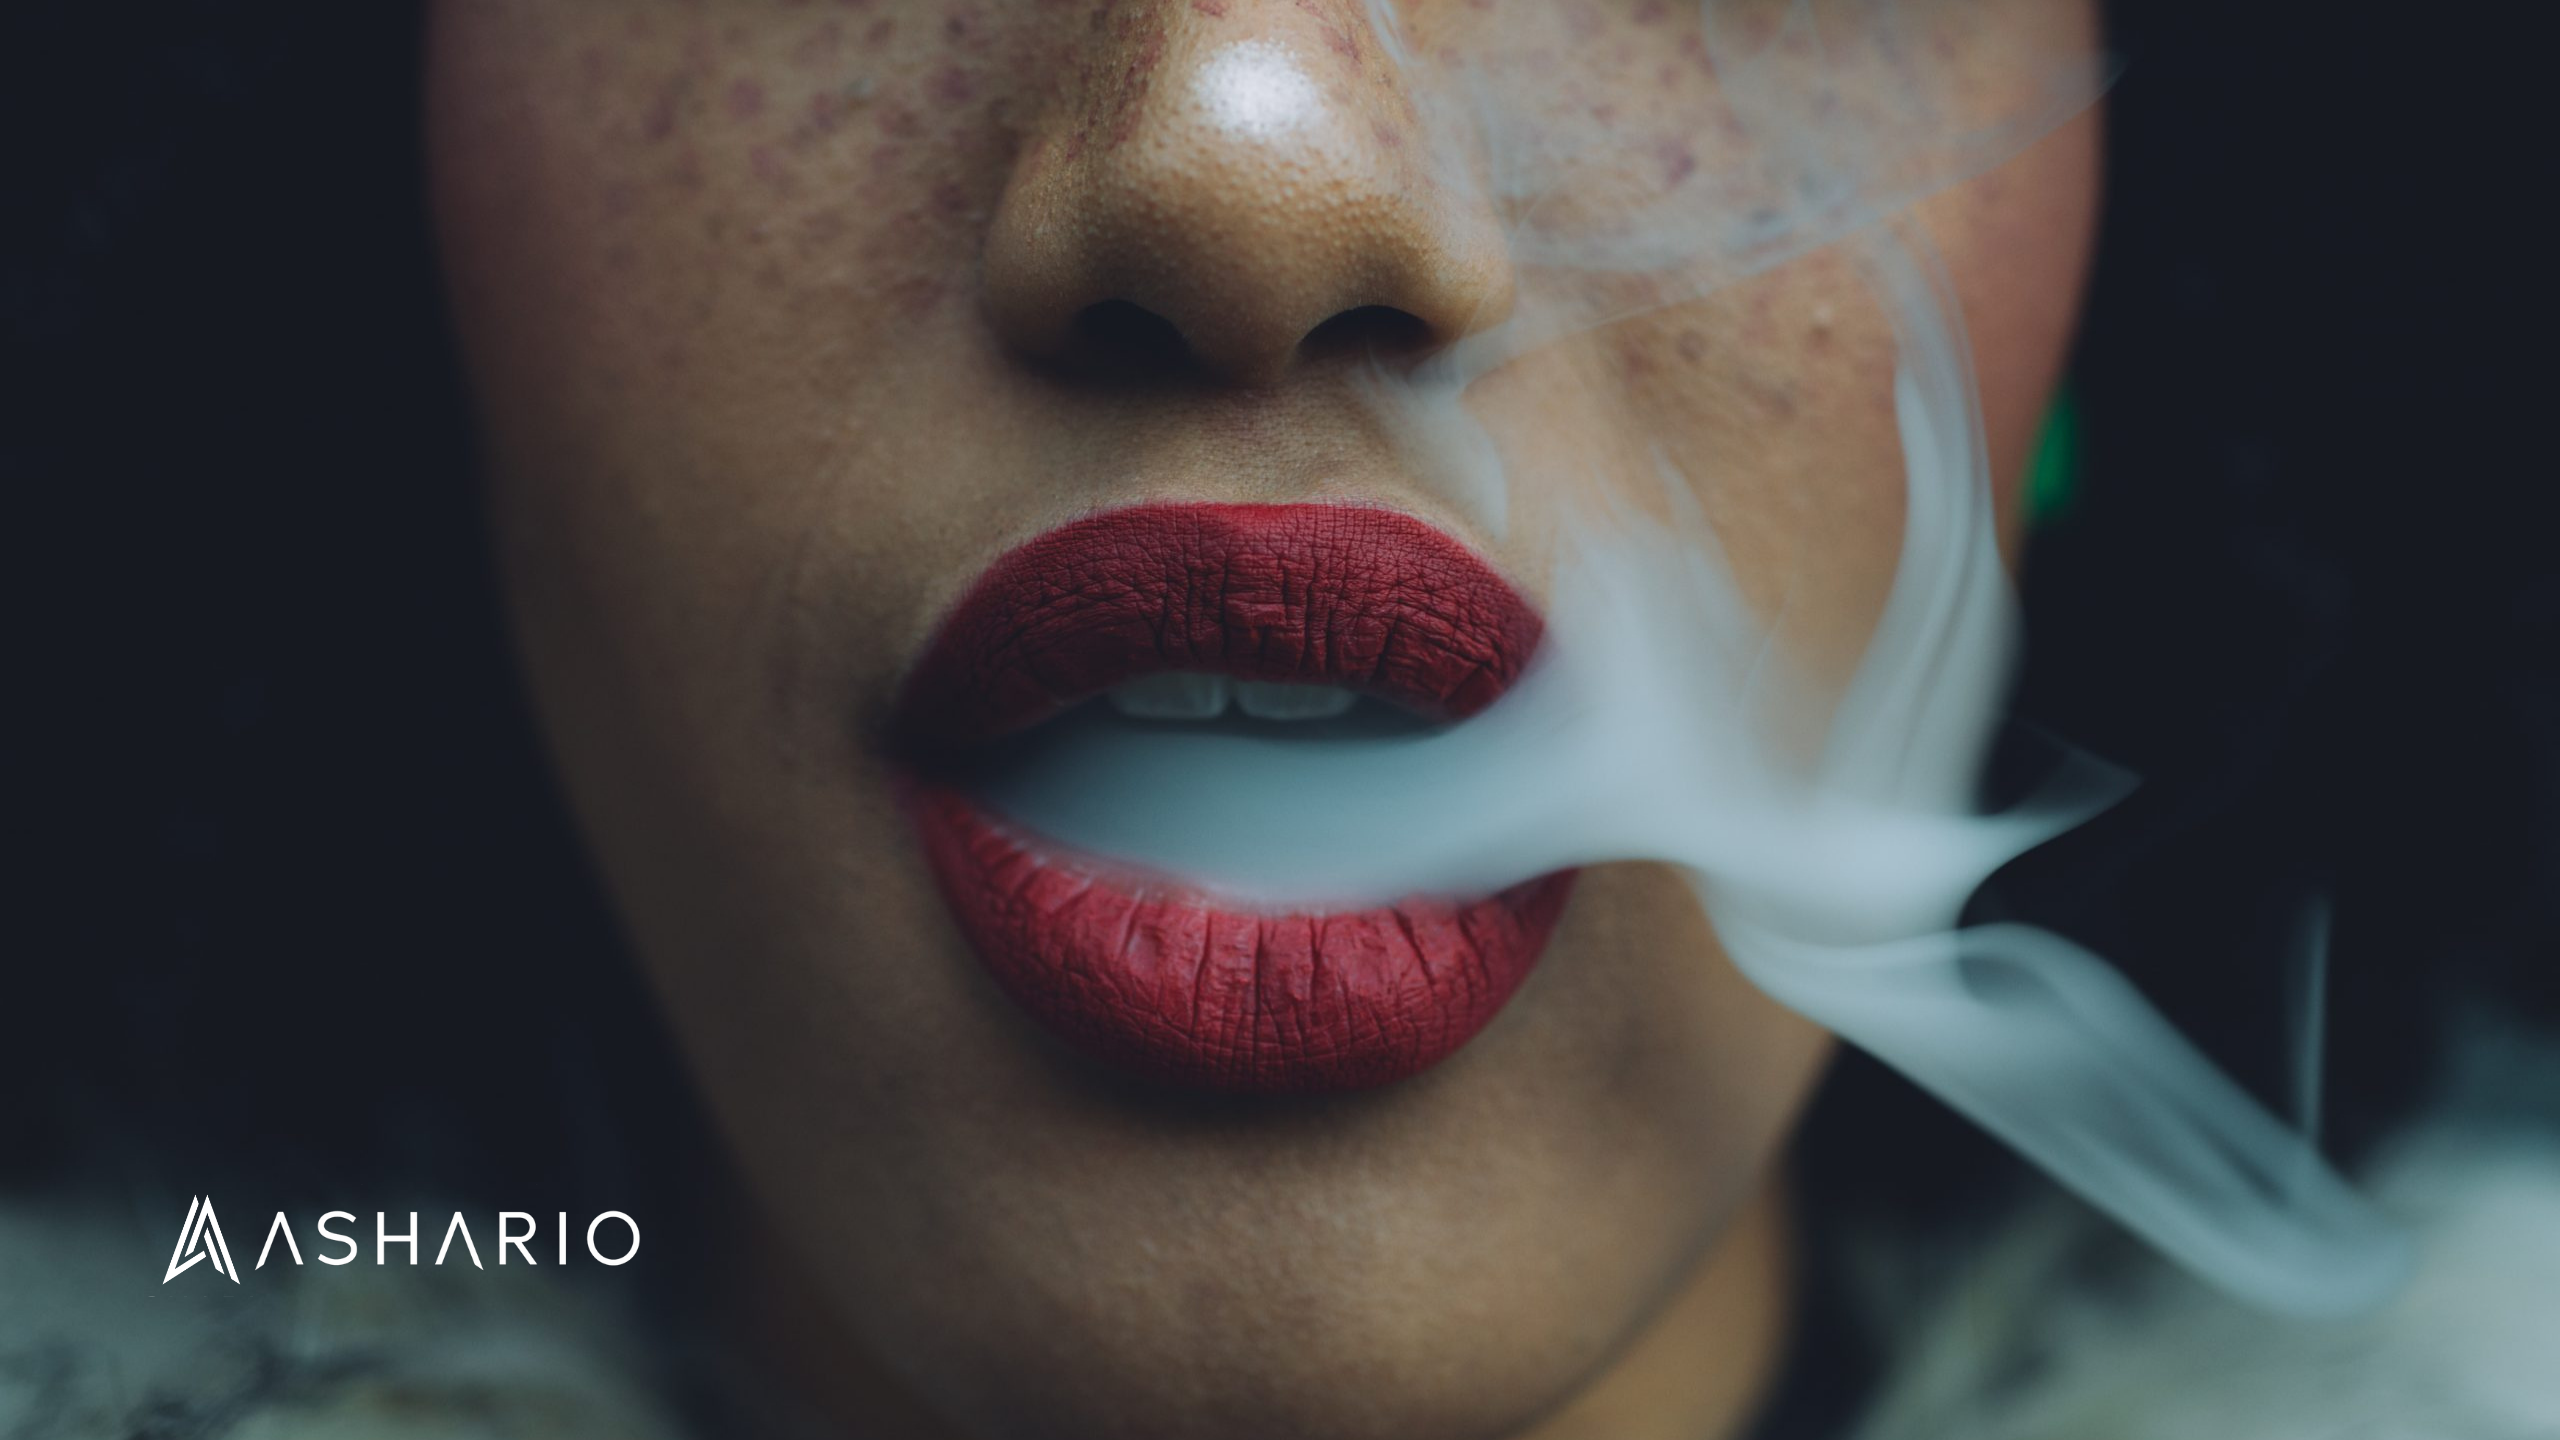 Join us for a crash course in weed slang as we dive into the colourful language of cannabis culture.